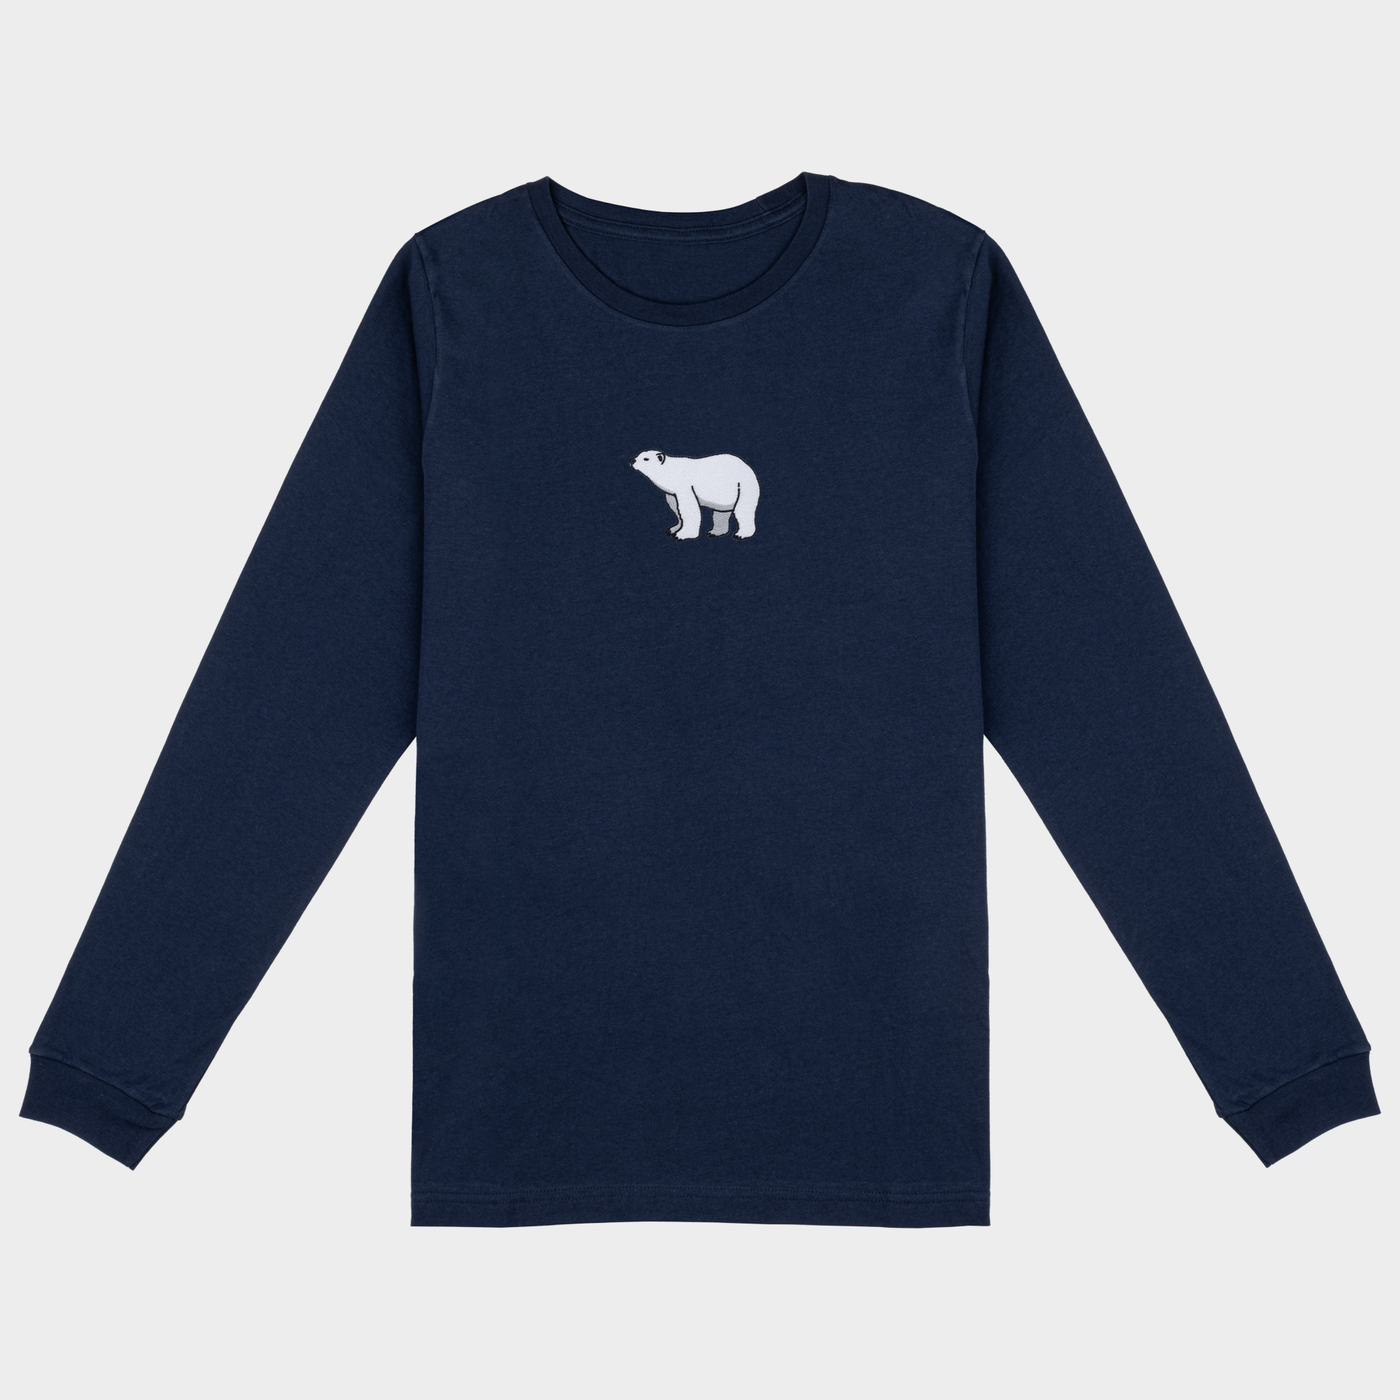 Bobby's Planet Women's Embroidered Polar Bear Long Sleeve Shirt from Arctic Polar Animals Collection in Navy Color#color_navy